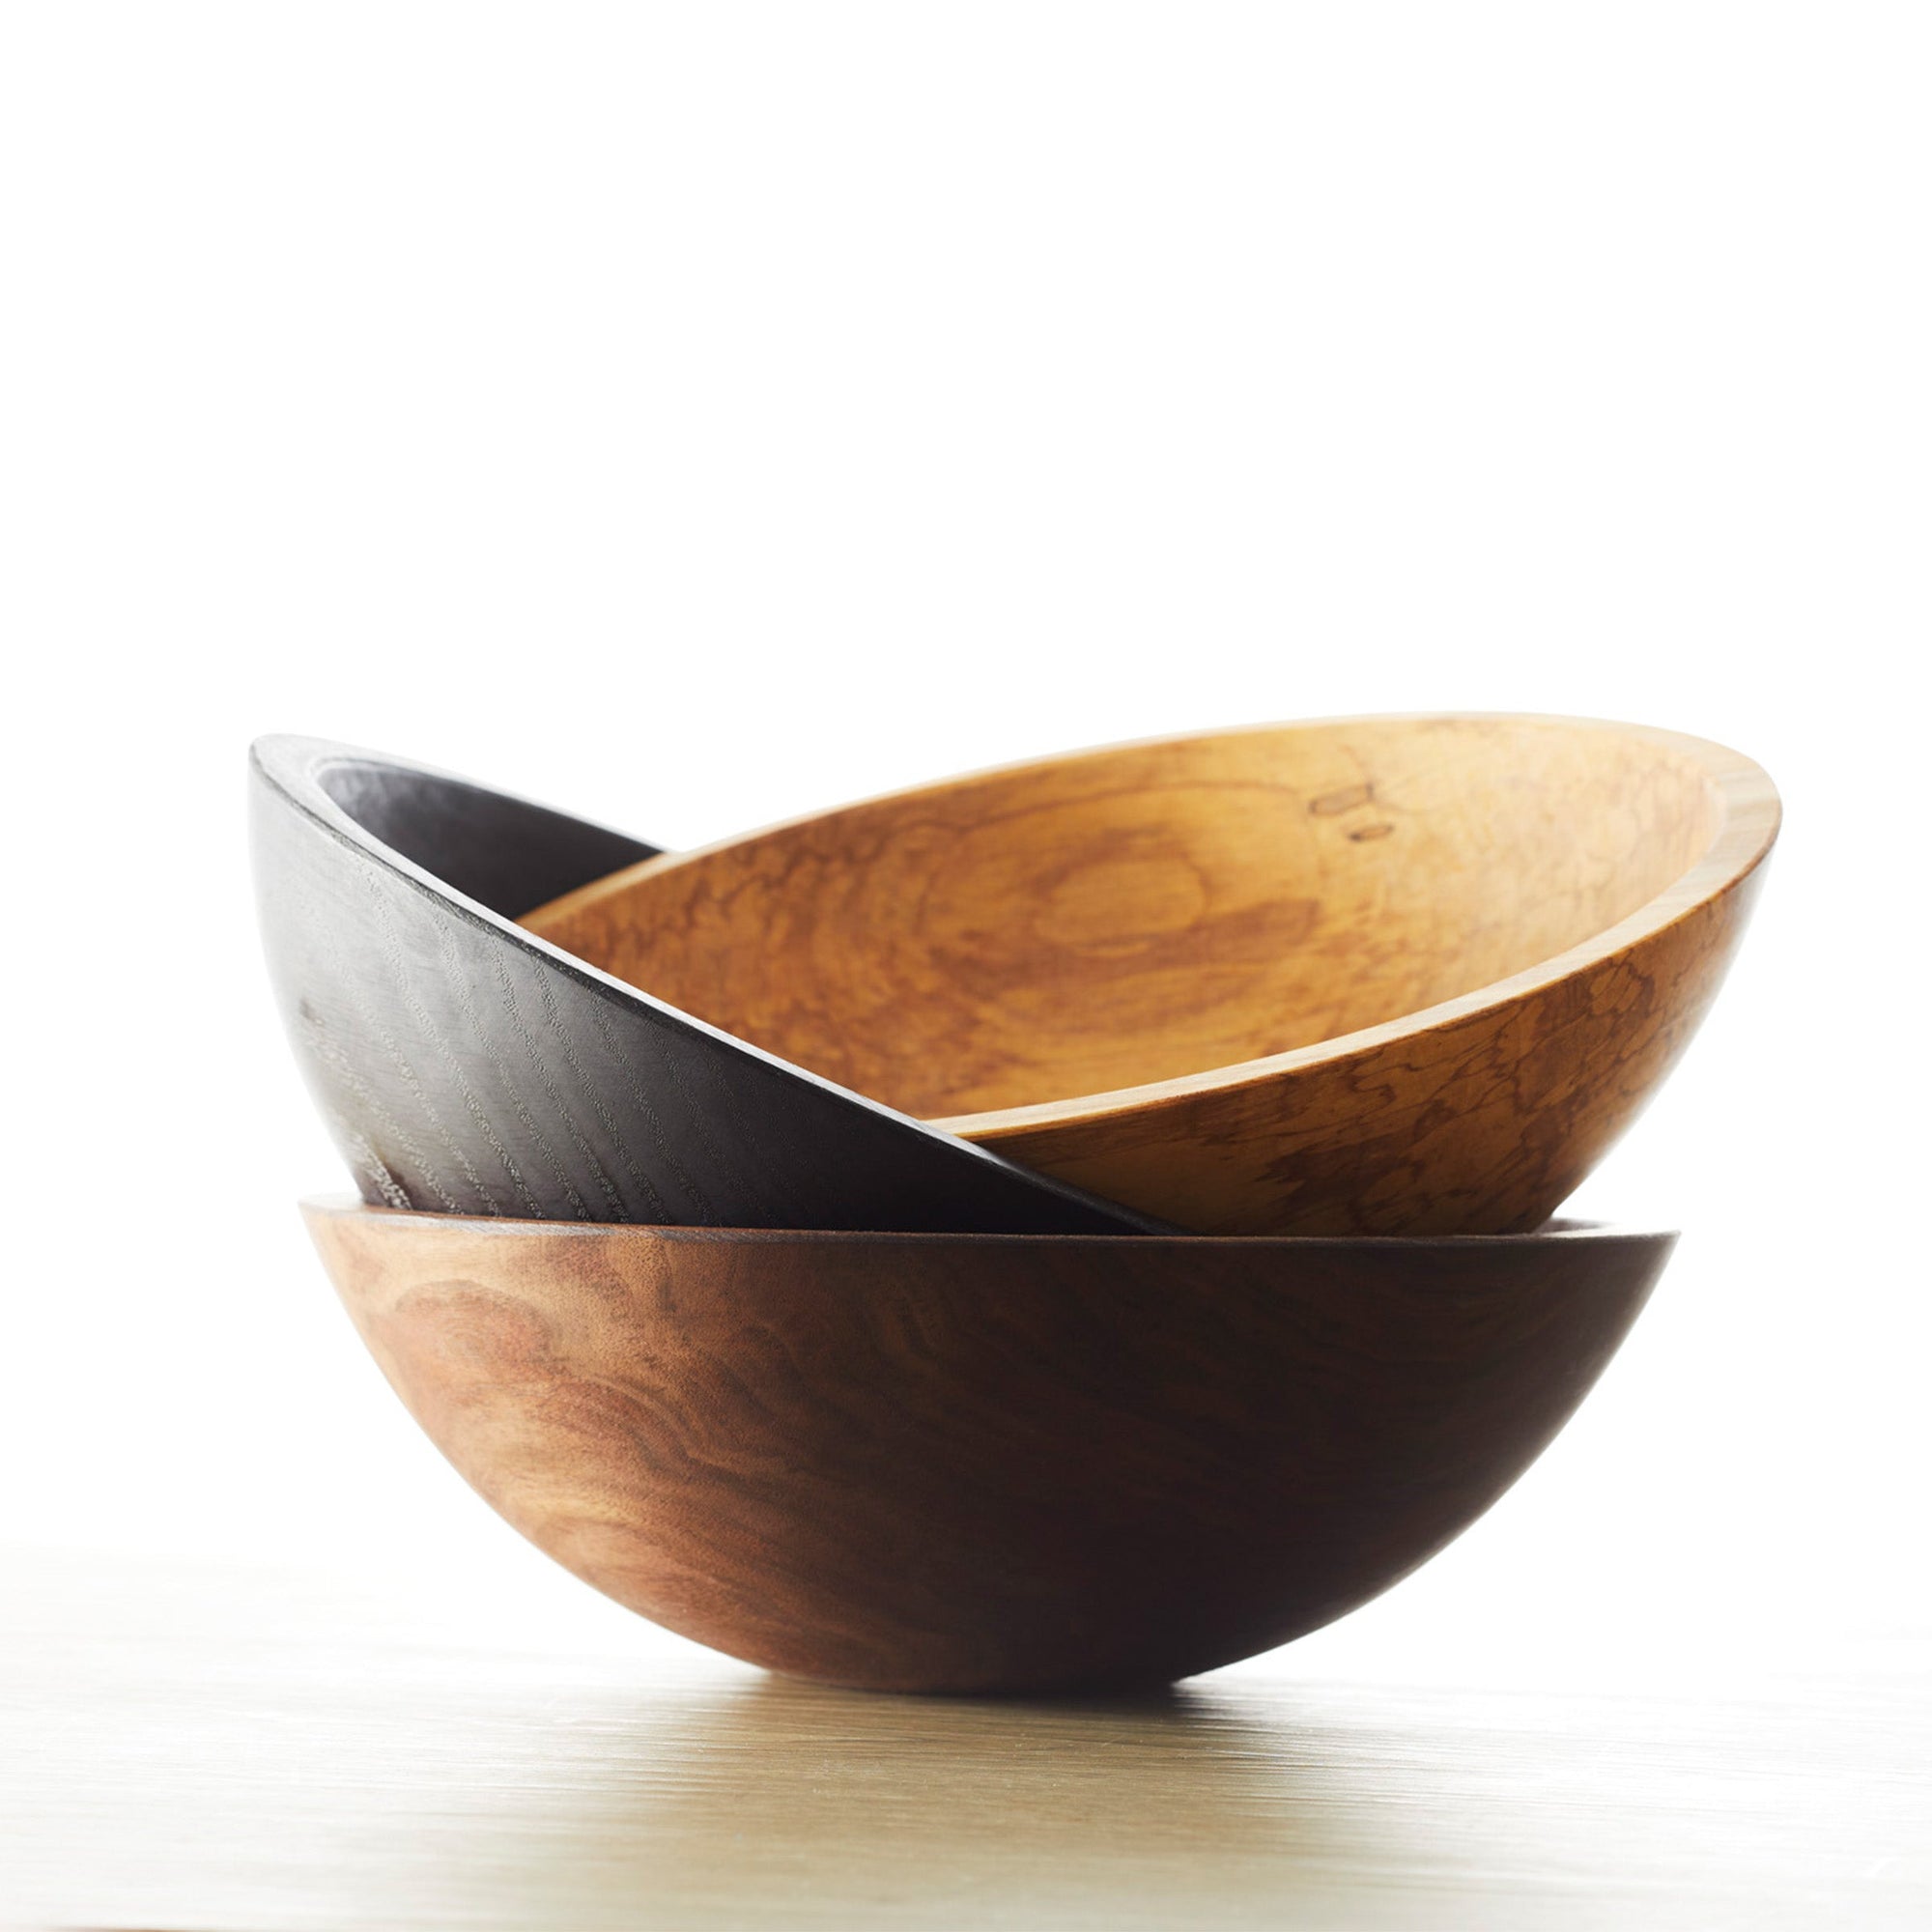 Spalted Maple 13" Handcrafted Serving Bowl - Caskata